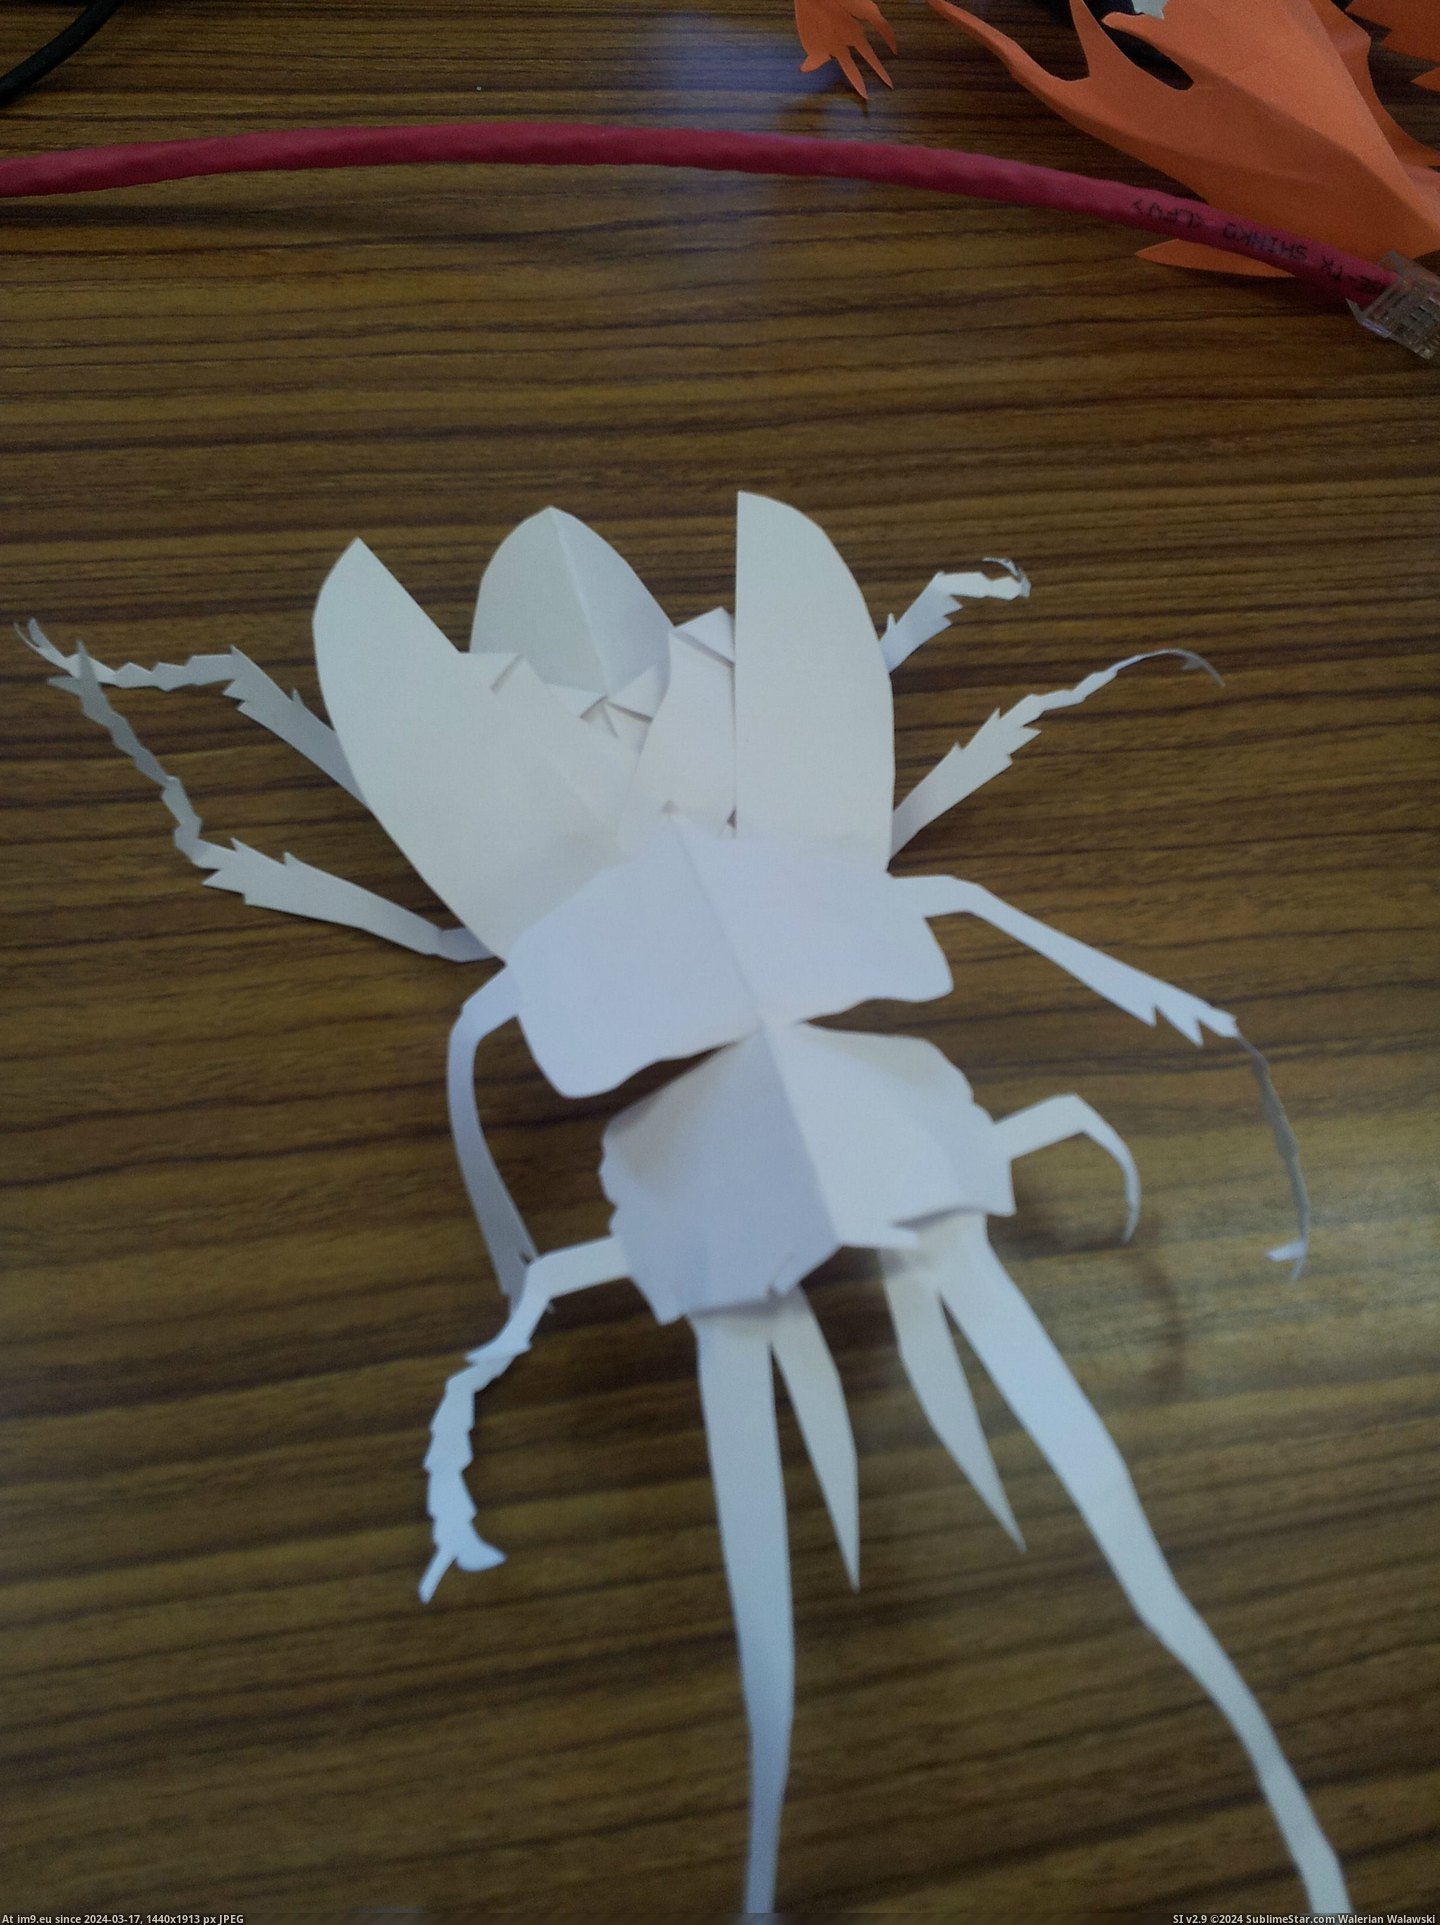 #One #Paper #Students #Creatures #Freehand #Bored #Completely [Pics] One of my students makes these creatures out of paper completely freehand whenever he is bored 9 Pic. (Bild von album My r/PICS favs))